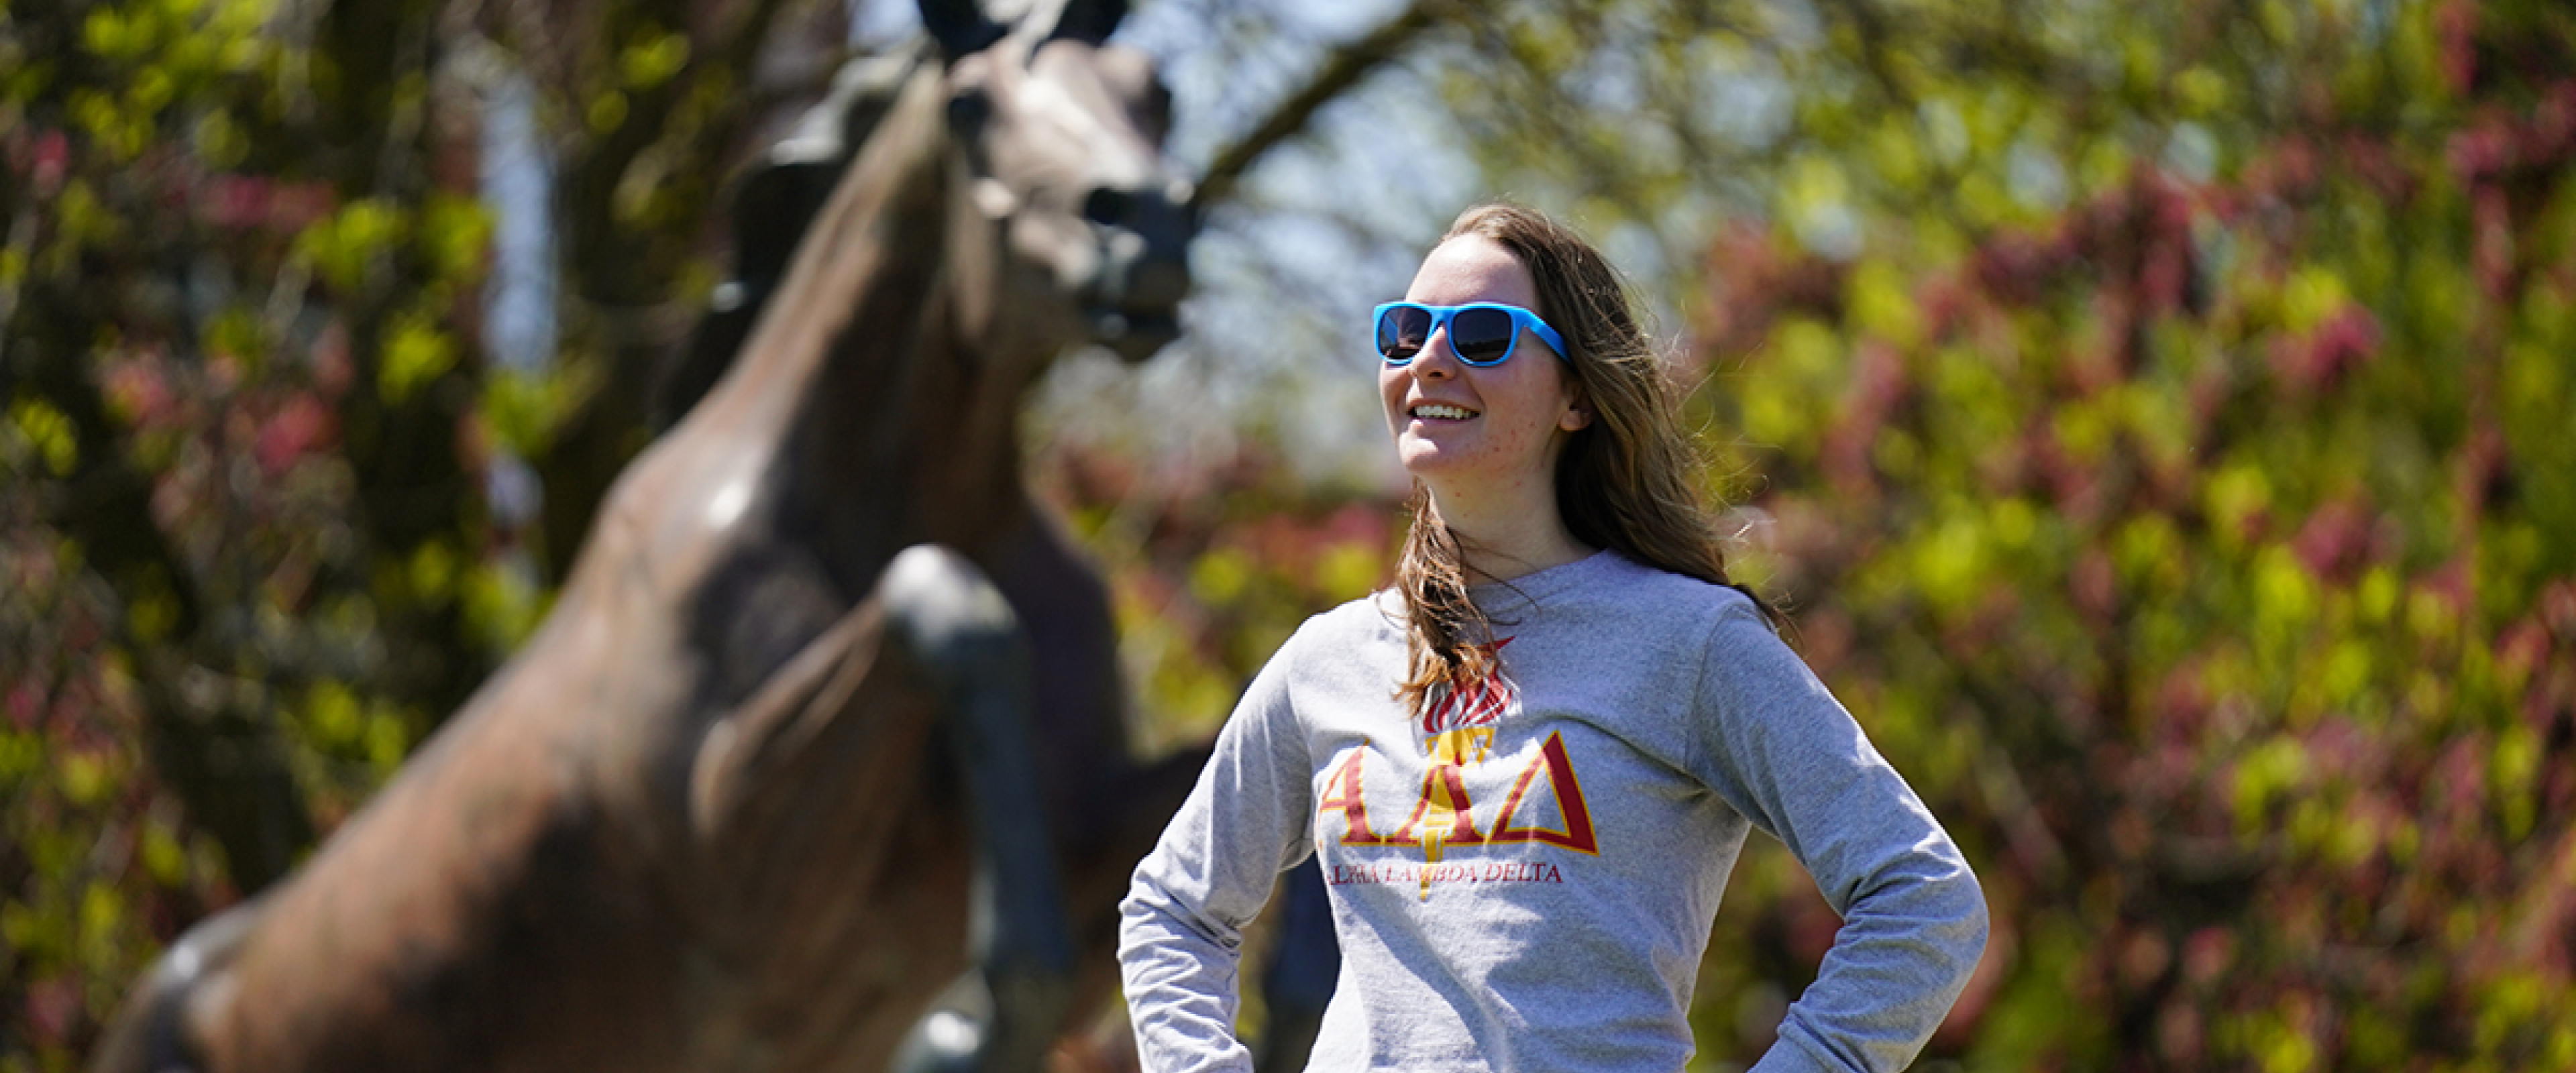 A student wearing an ALD shirt standing in front of the Bronco statue.